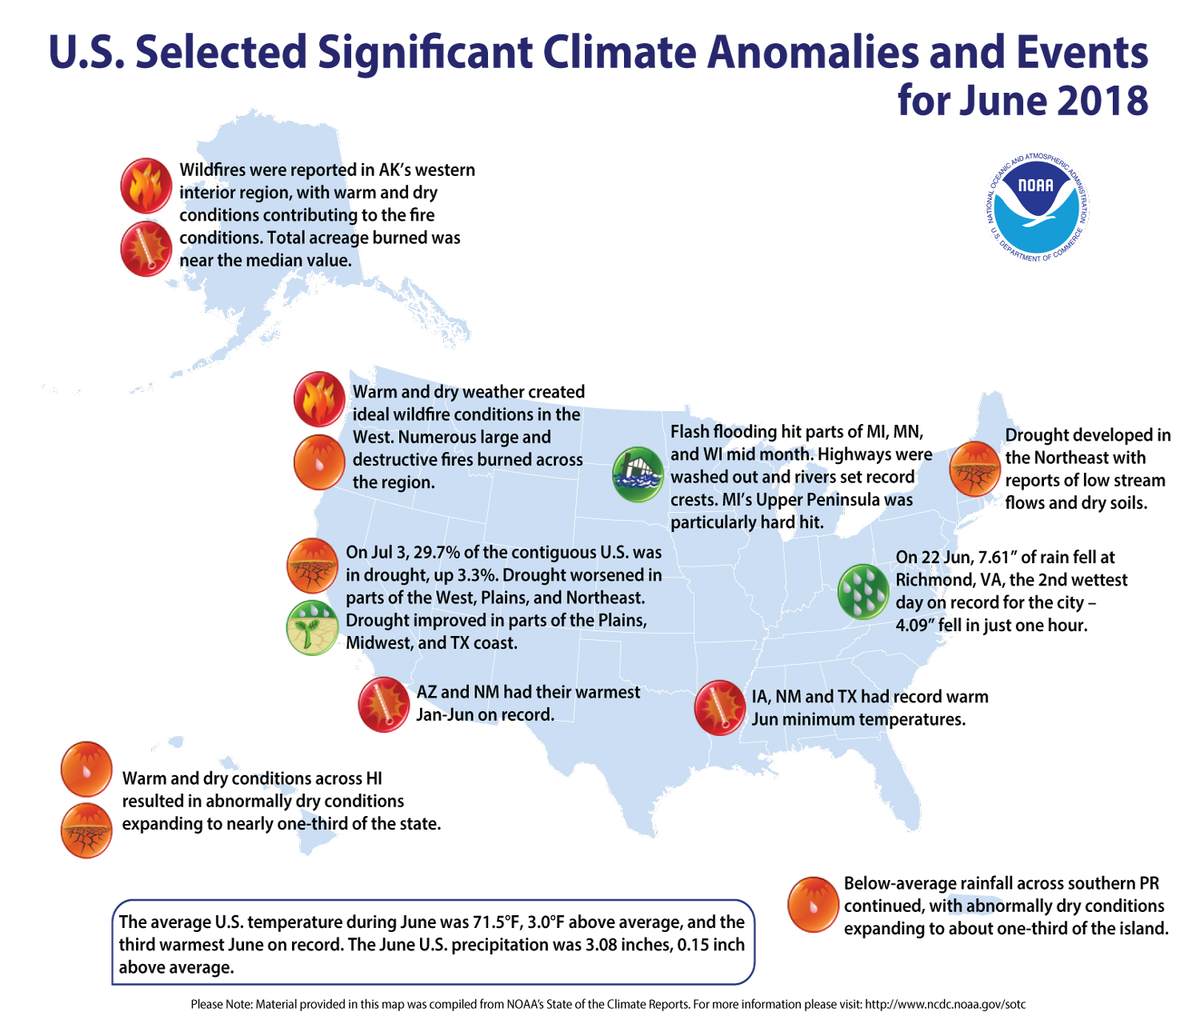 Map of U.S. selected significant climate anomalies and events for June 2018